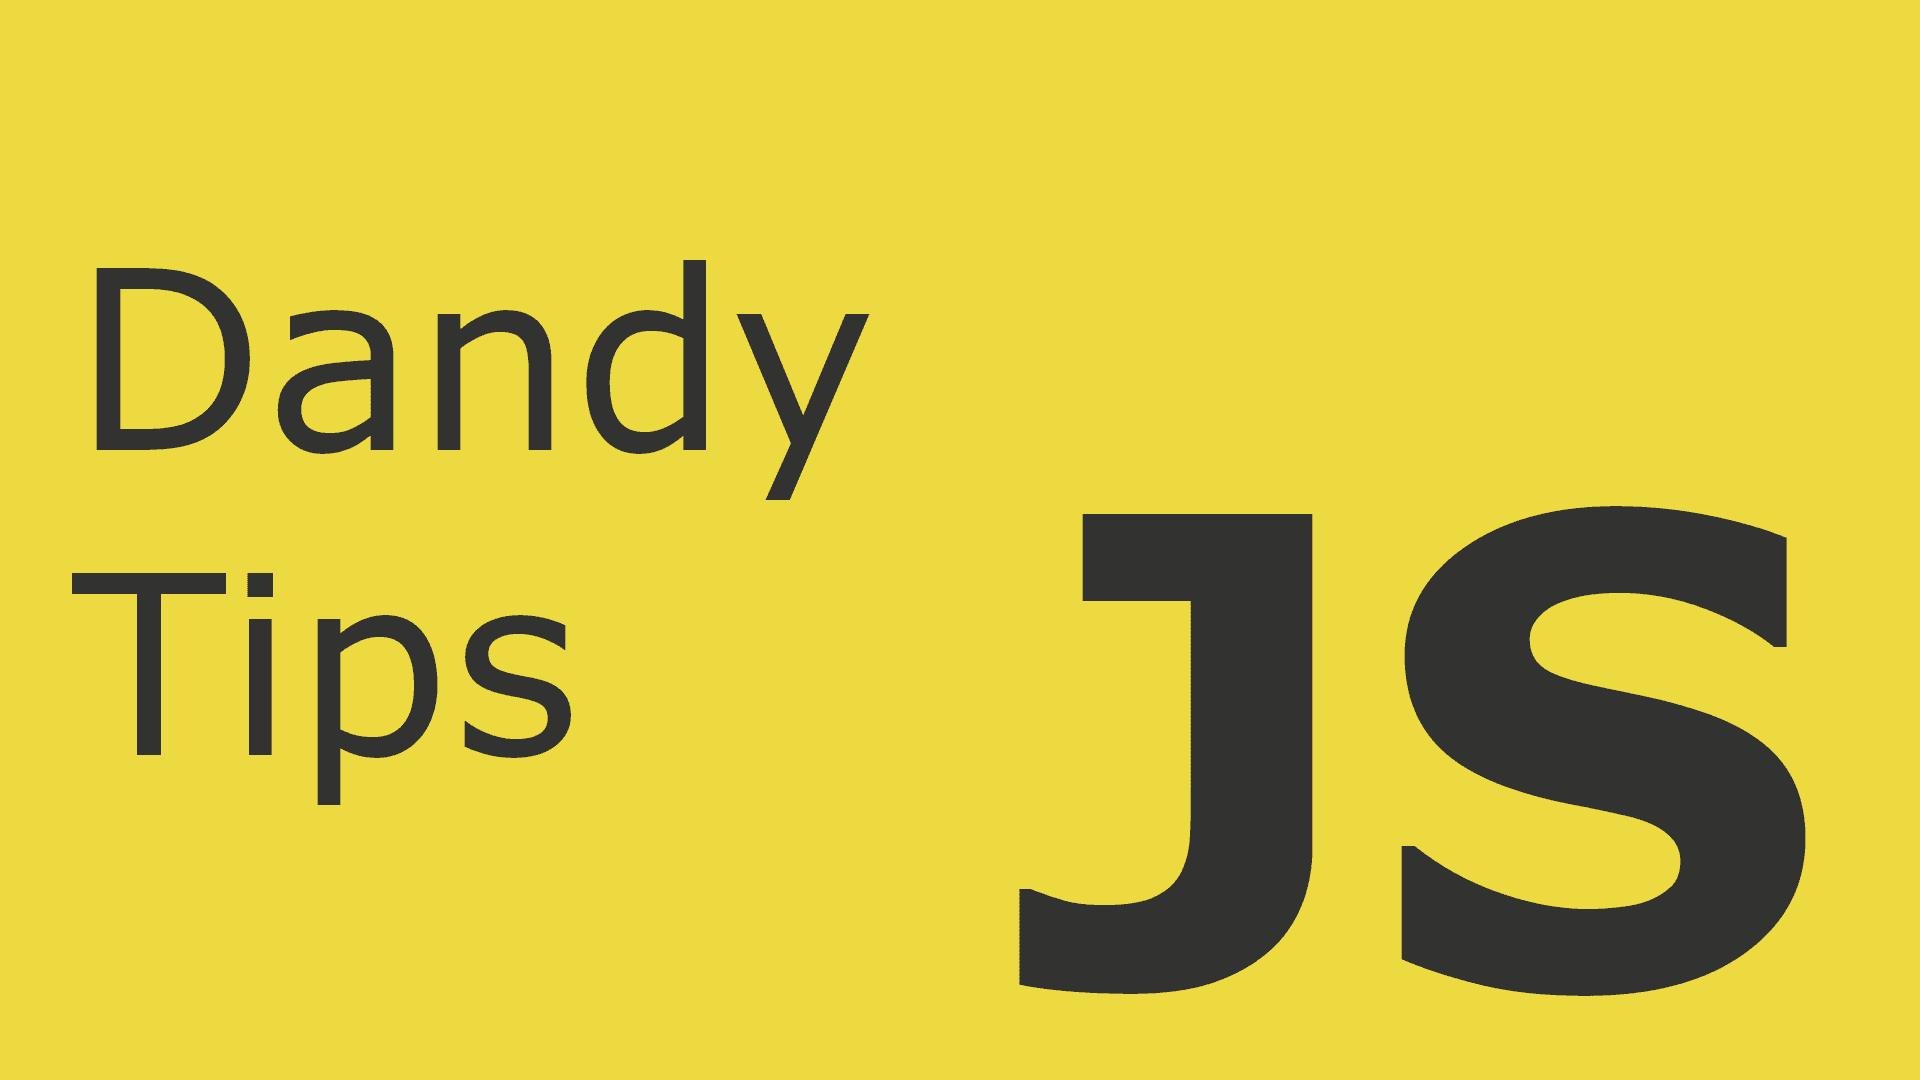 Image for /js-tidbits-for-tech-interviews/